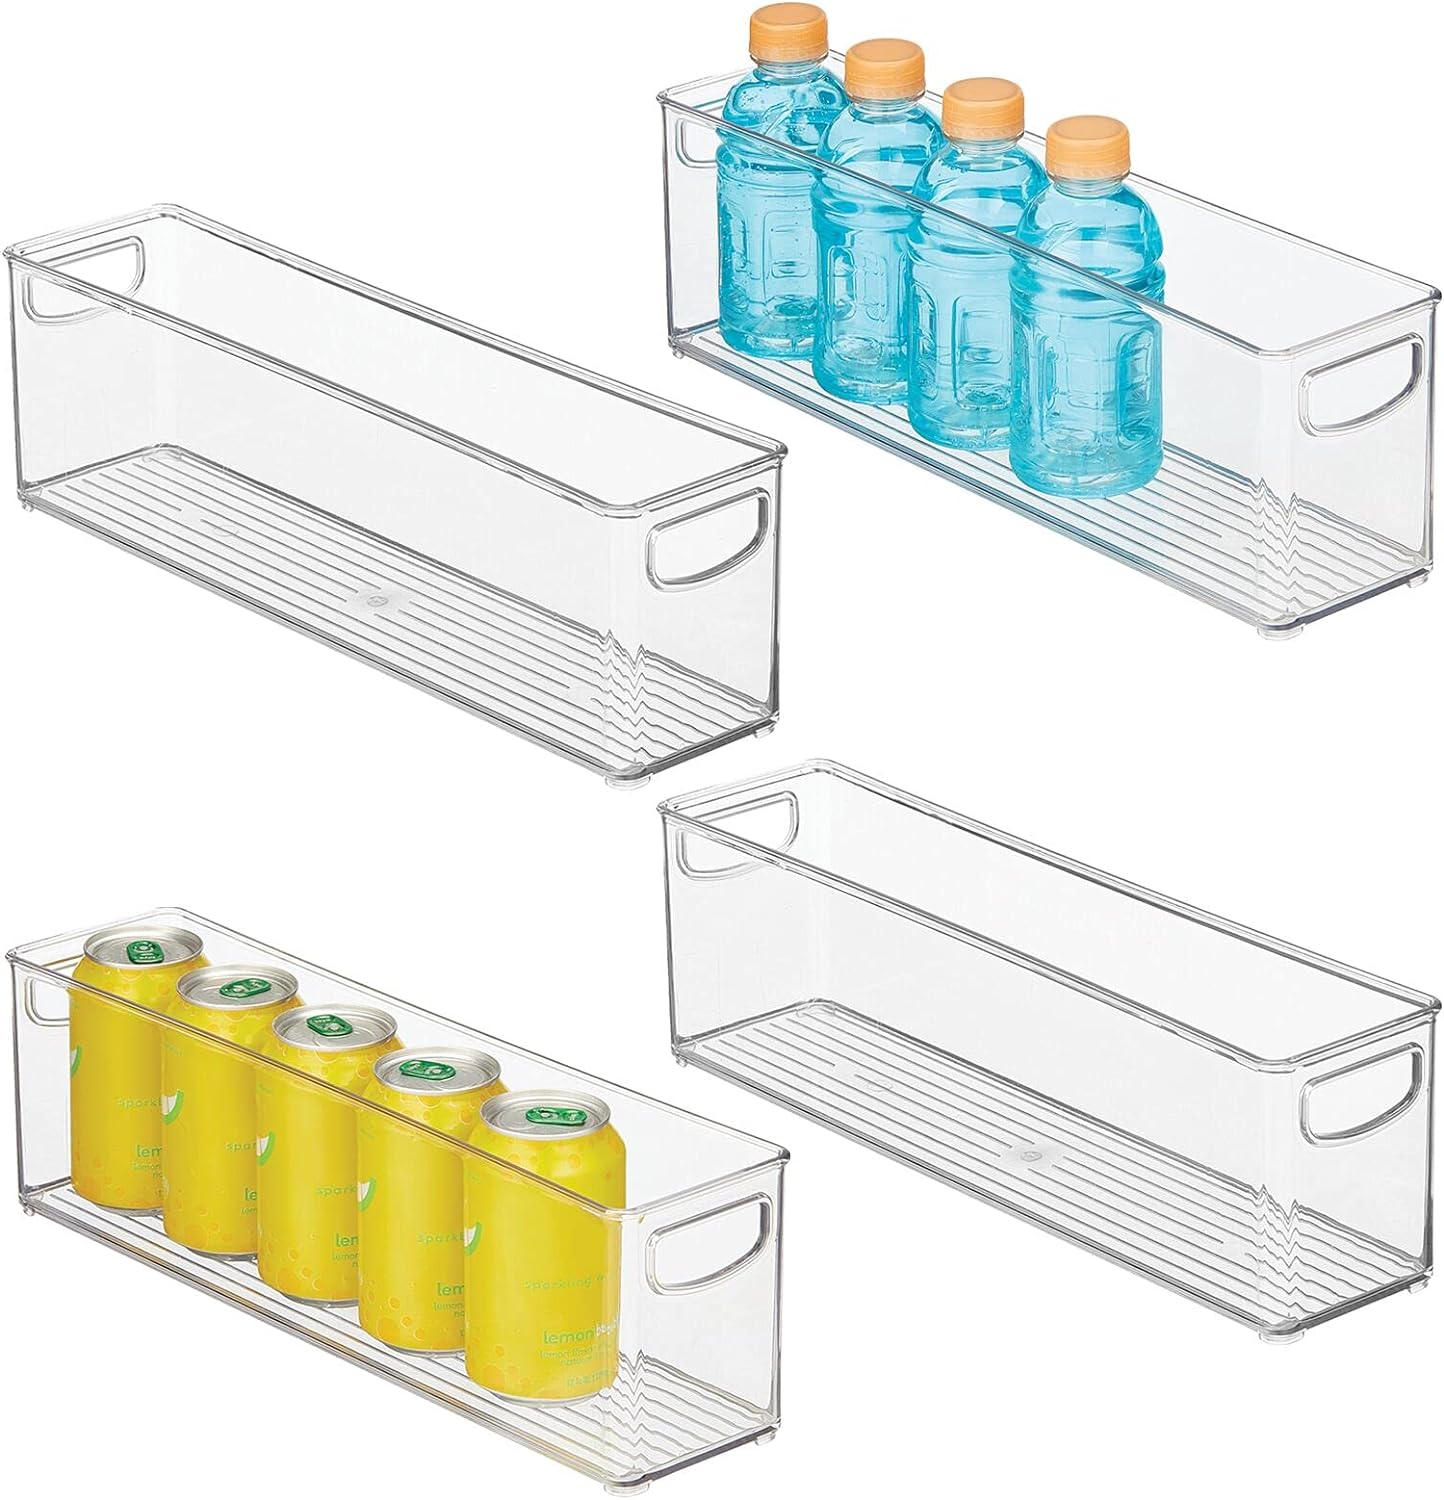 mDesign Plastic Kitchen Organizer - Storage Holder Bin with Handles for Pantry, Cupboard, Cabinet, Fridge/Freezer, Shelves, and Counter - Holds Canned Food, Snacks - Ligne Collection - 4 Pack - Clear